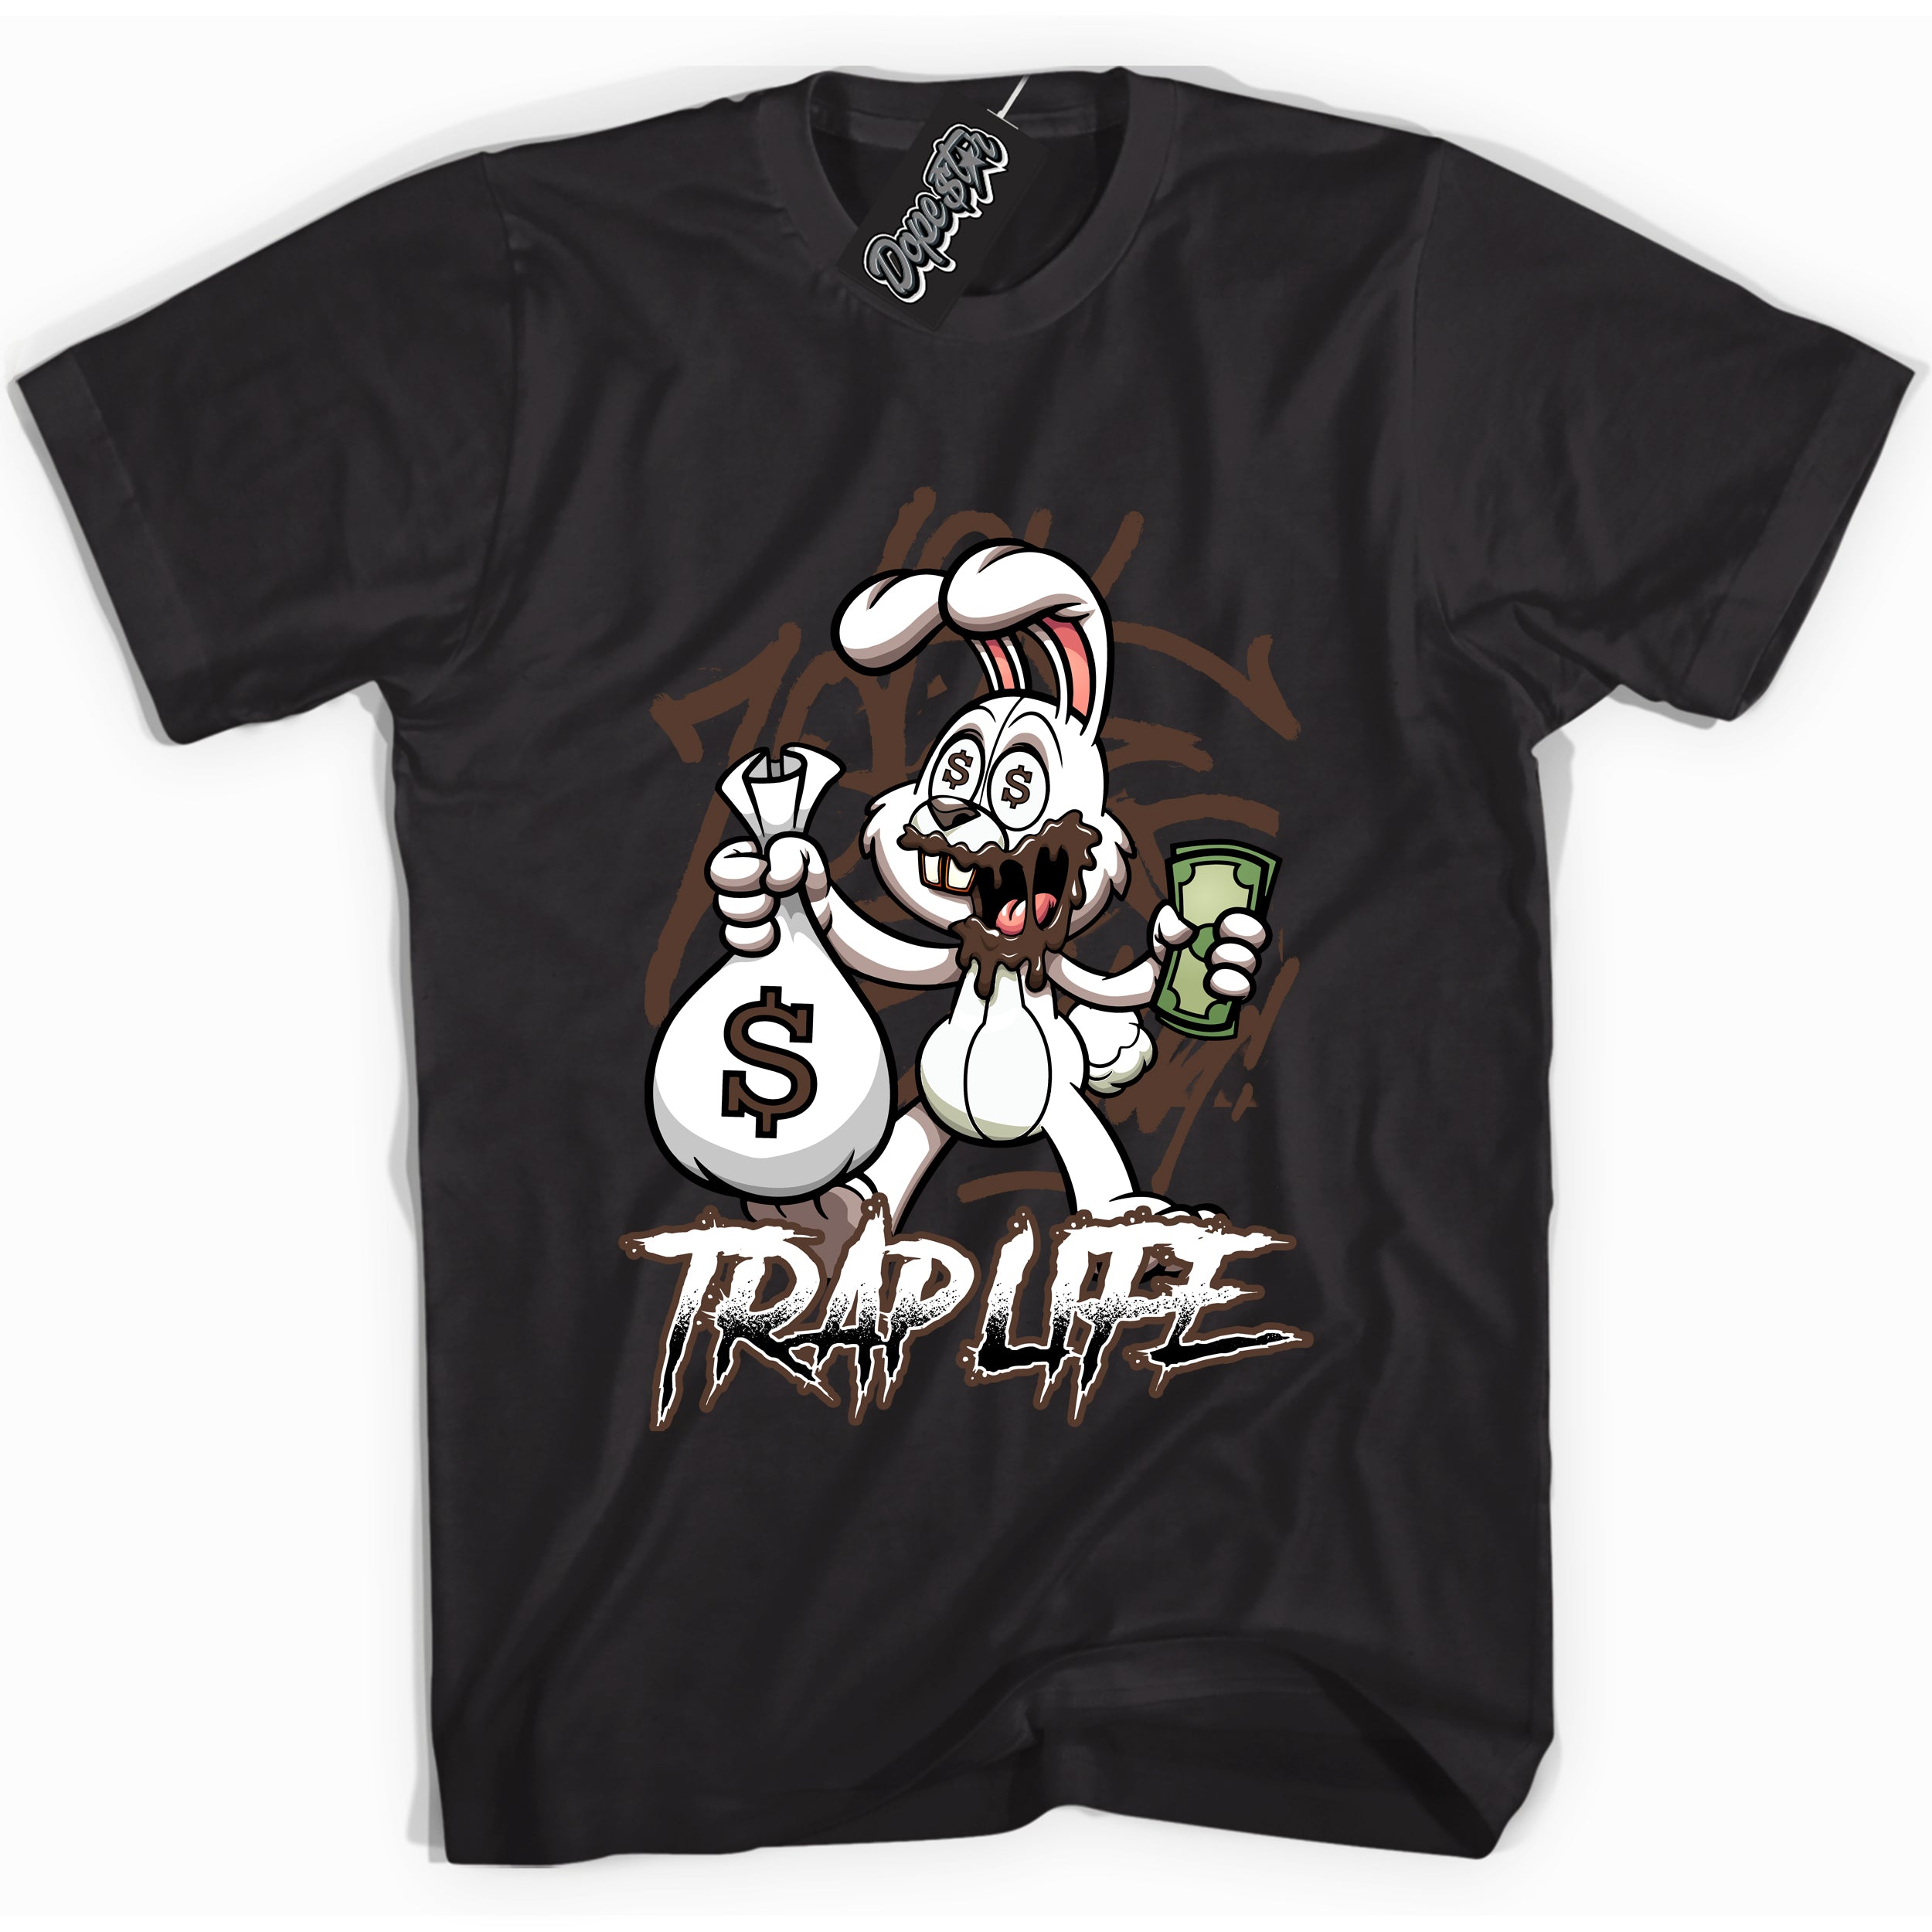 Cool Black graphic tee with “ Trap Rabbit ” design, that perfectly matches Palomino 1s sneakers 